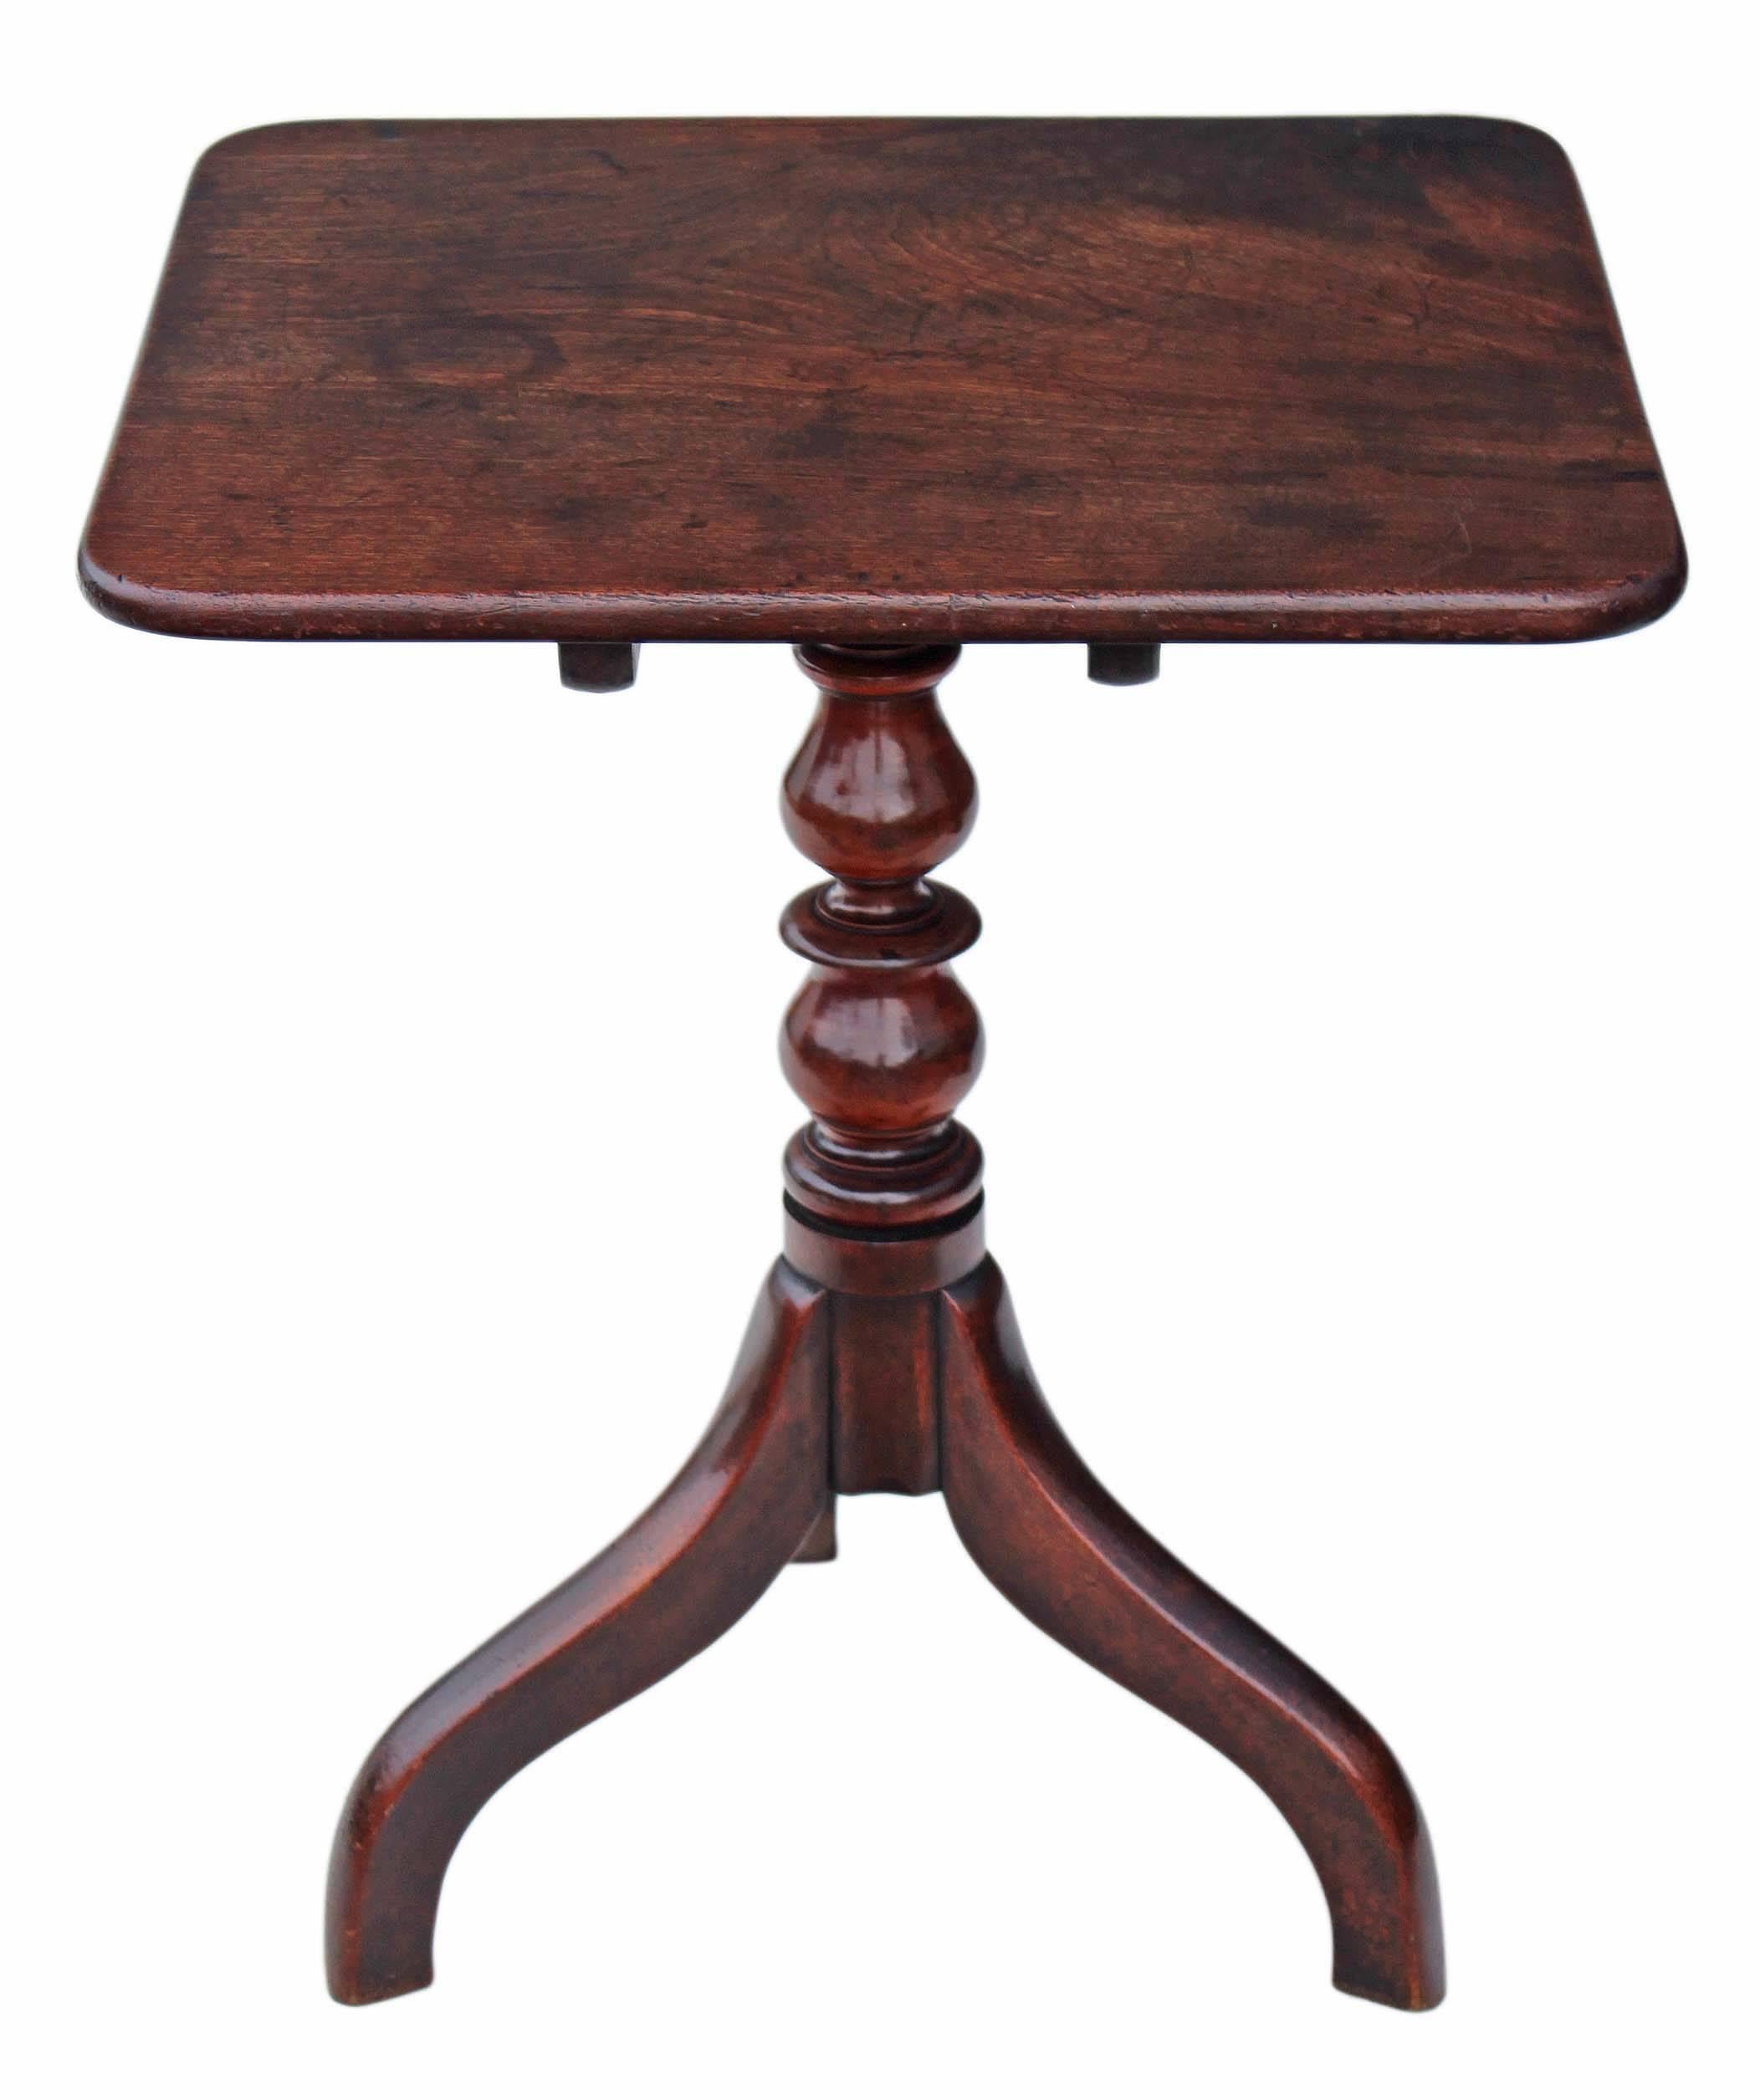 Antique Georgian mahogany tilt-top supper, side or occasional table.

This is a lovely table, that is full of age, charm and character.

Very attractive thick, quality heavily patinated top.

No loose joints or wobbles.

Simple tripod base a